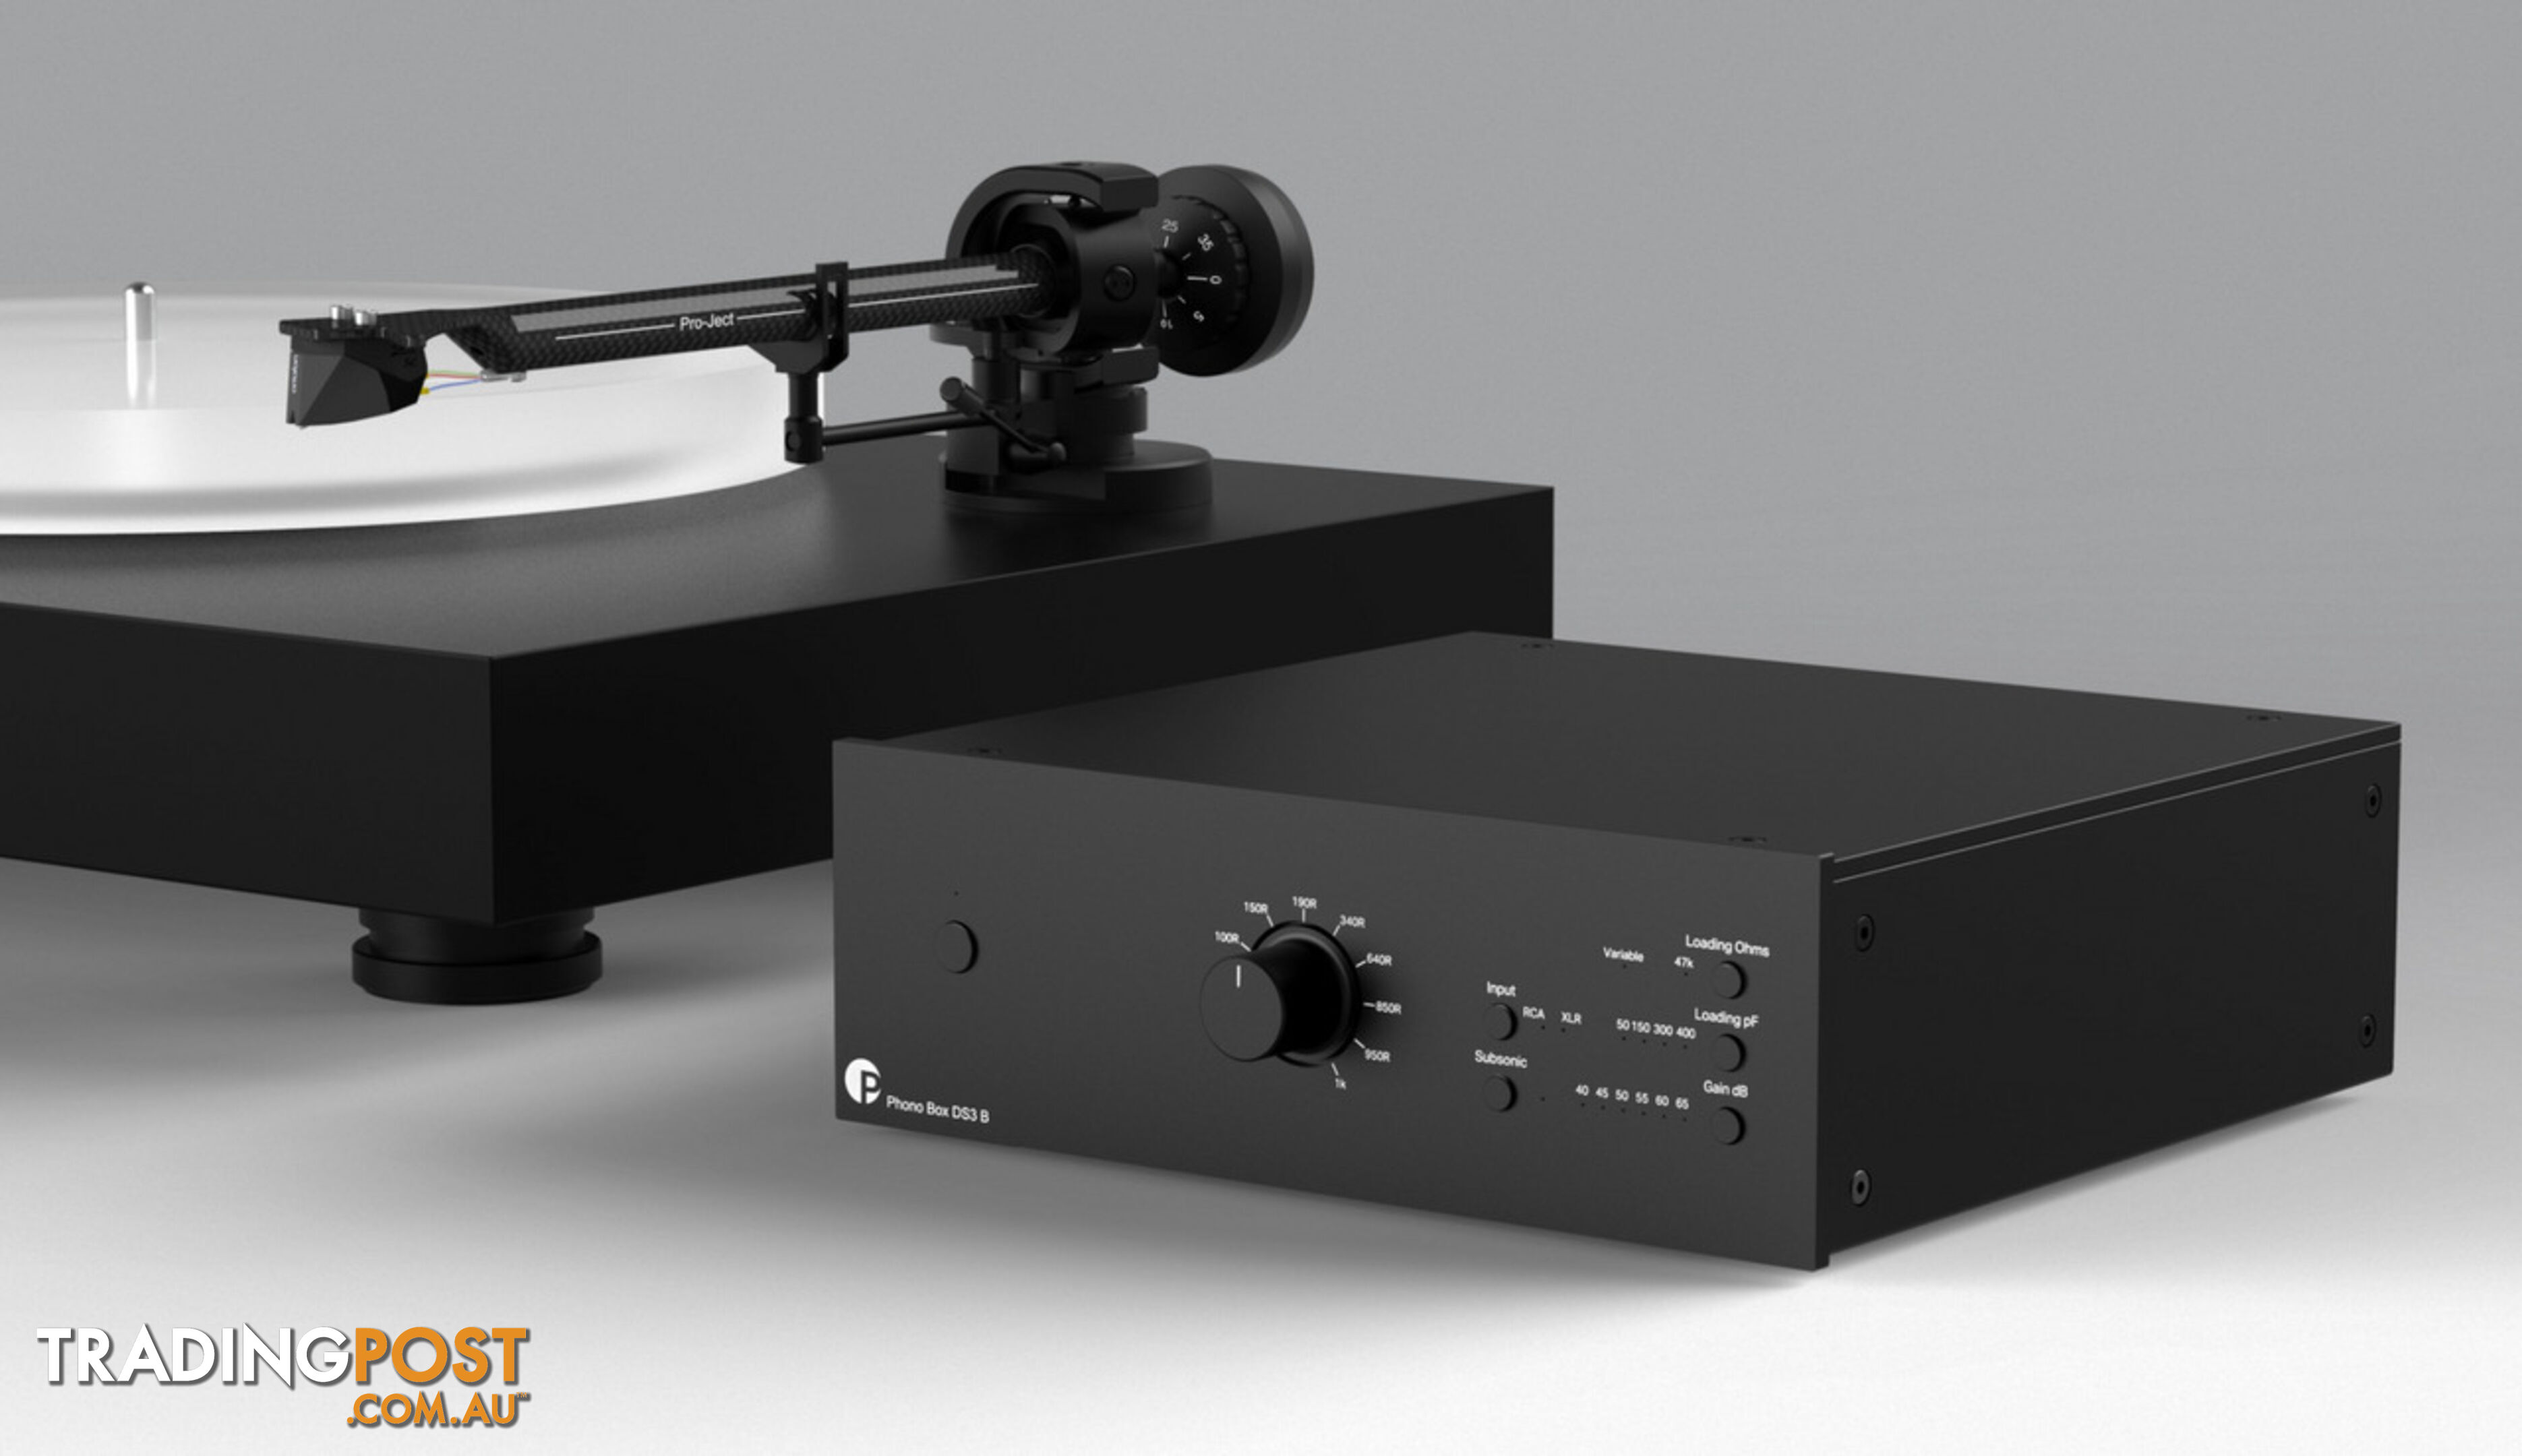 ProJect DS3 B Phono Preamplifier